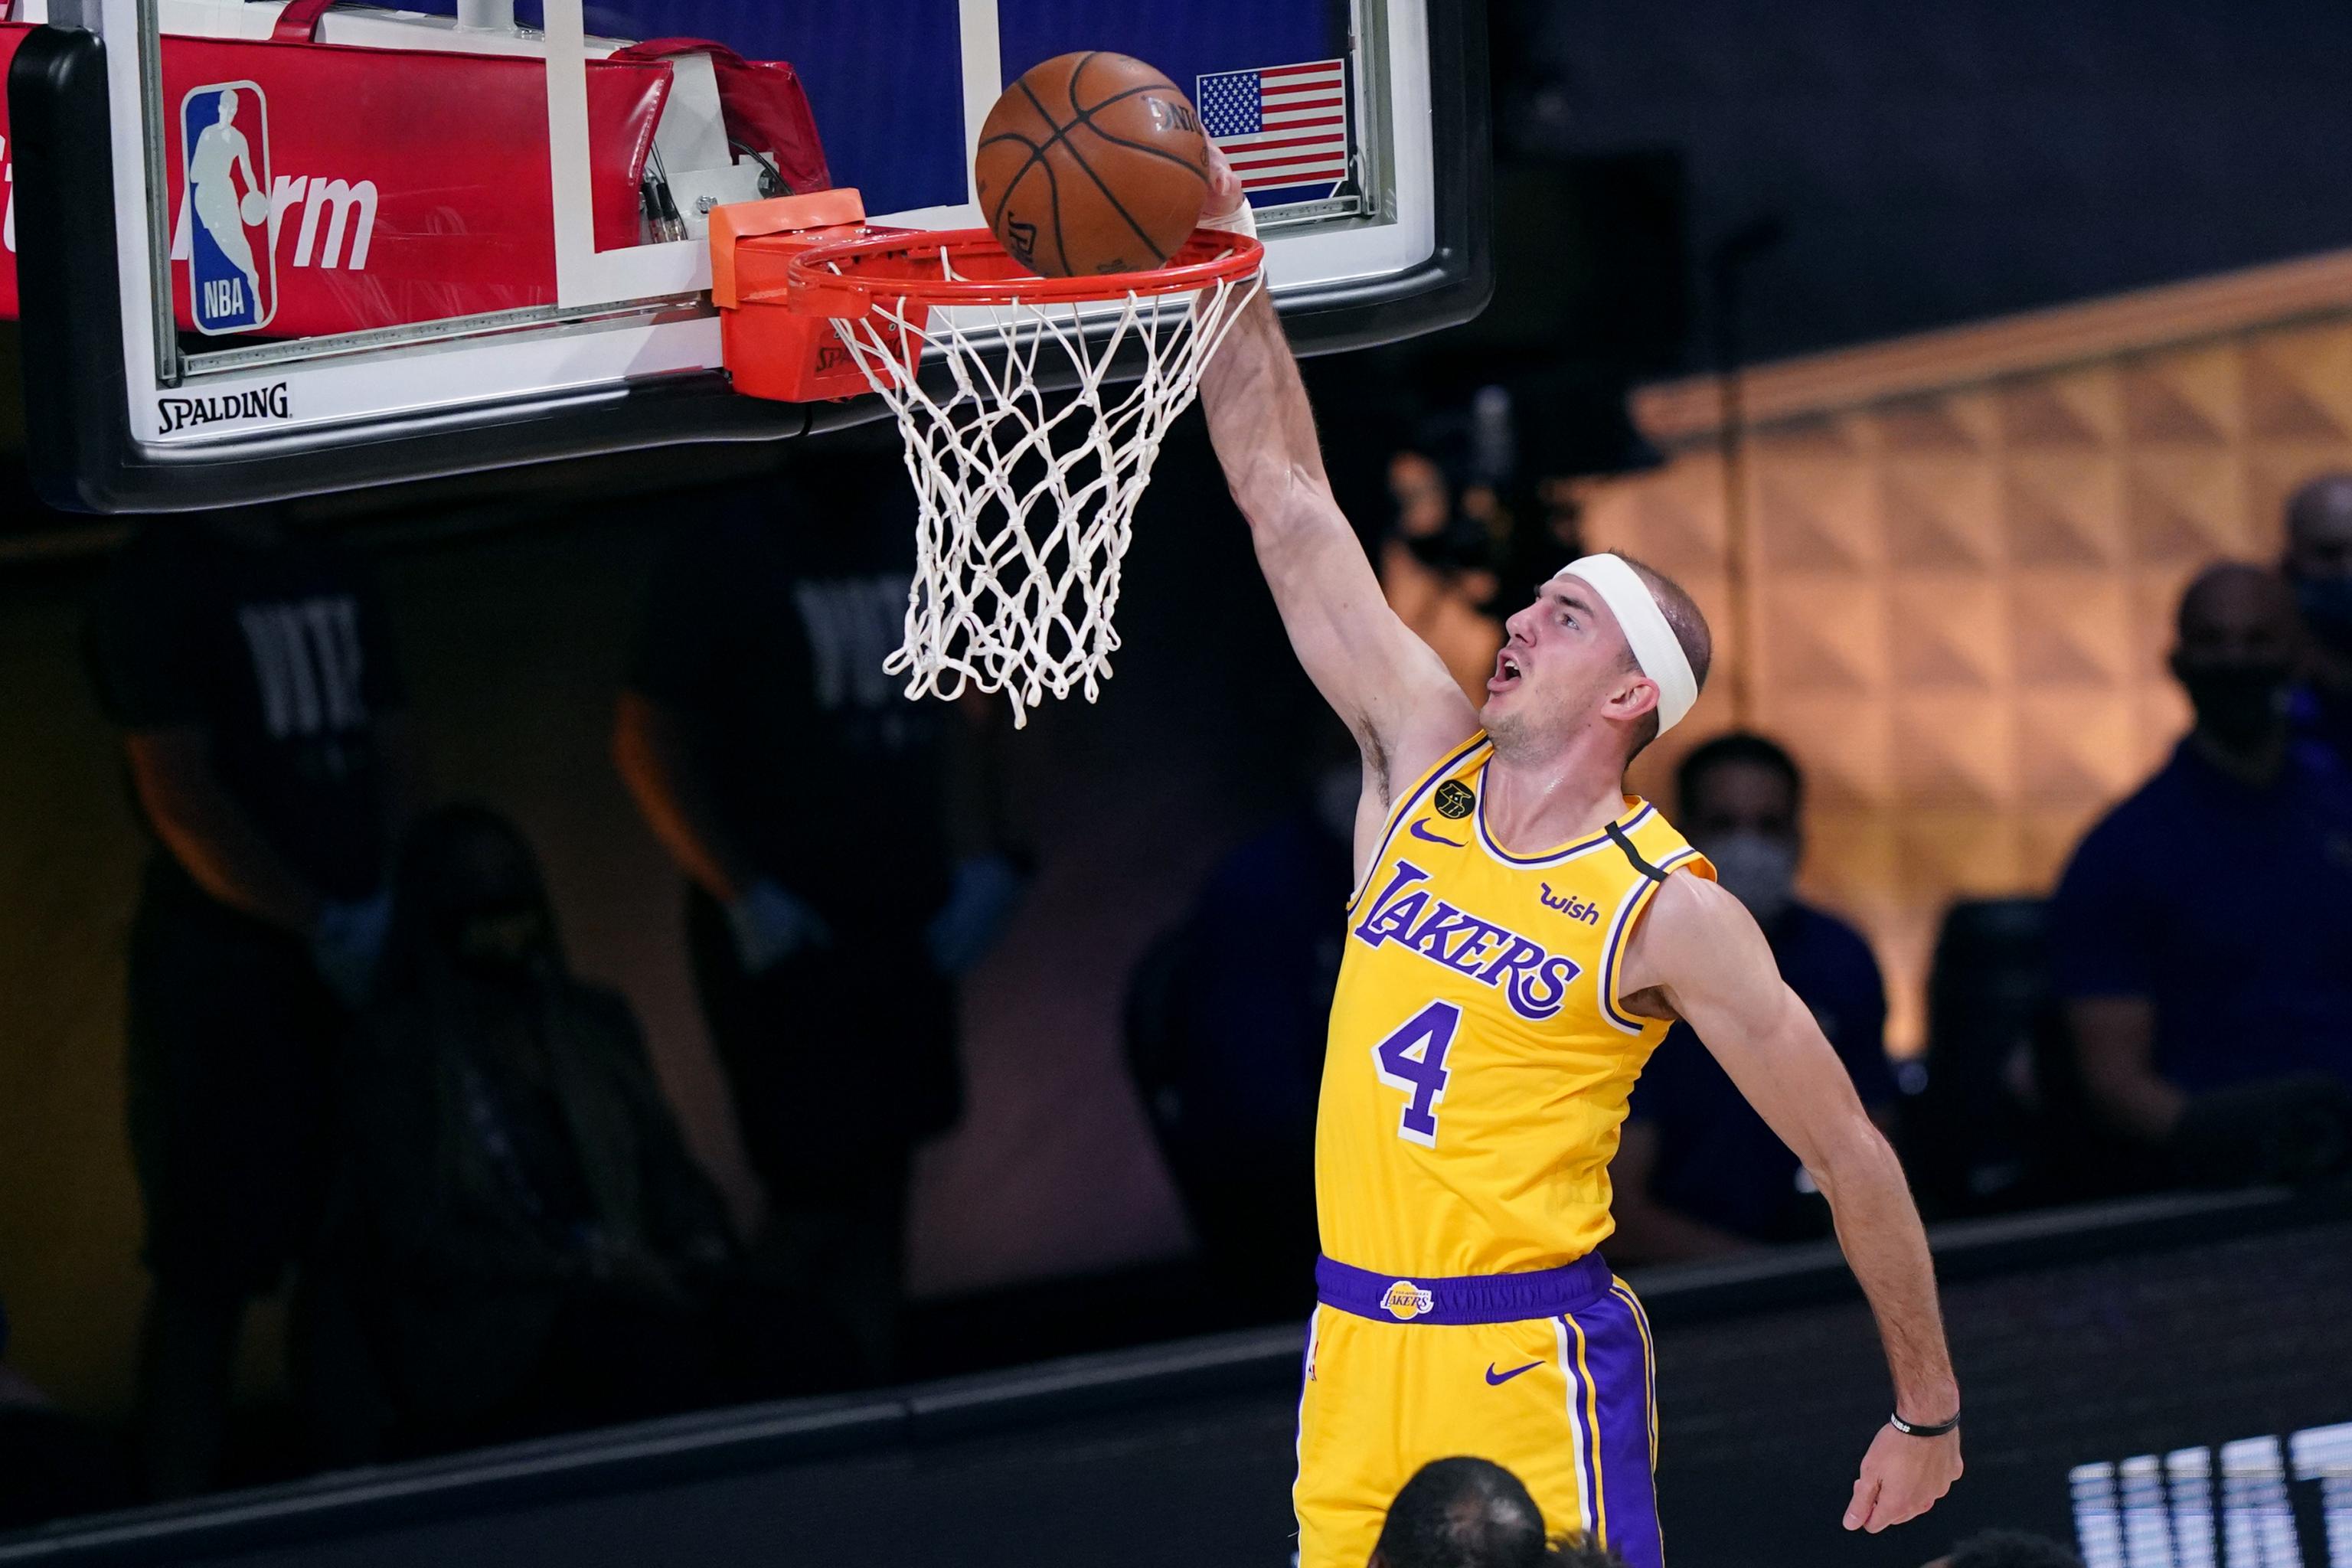 Alex Caruso was invited to the dunk contest but declined. #lakers